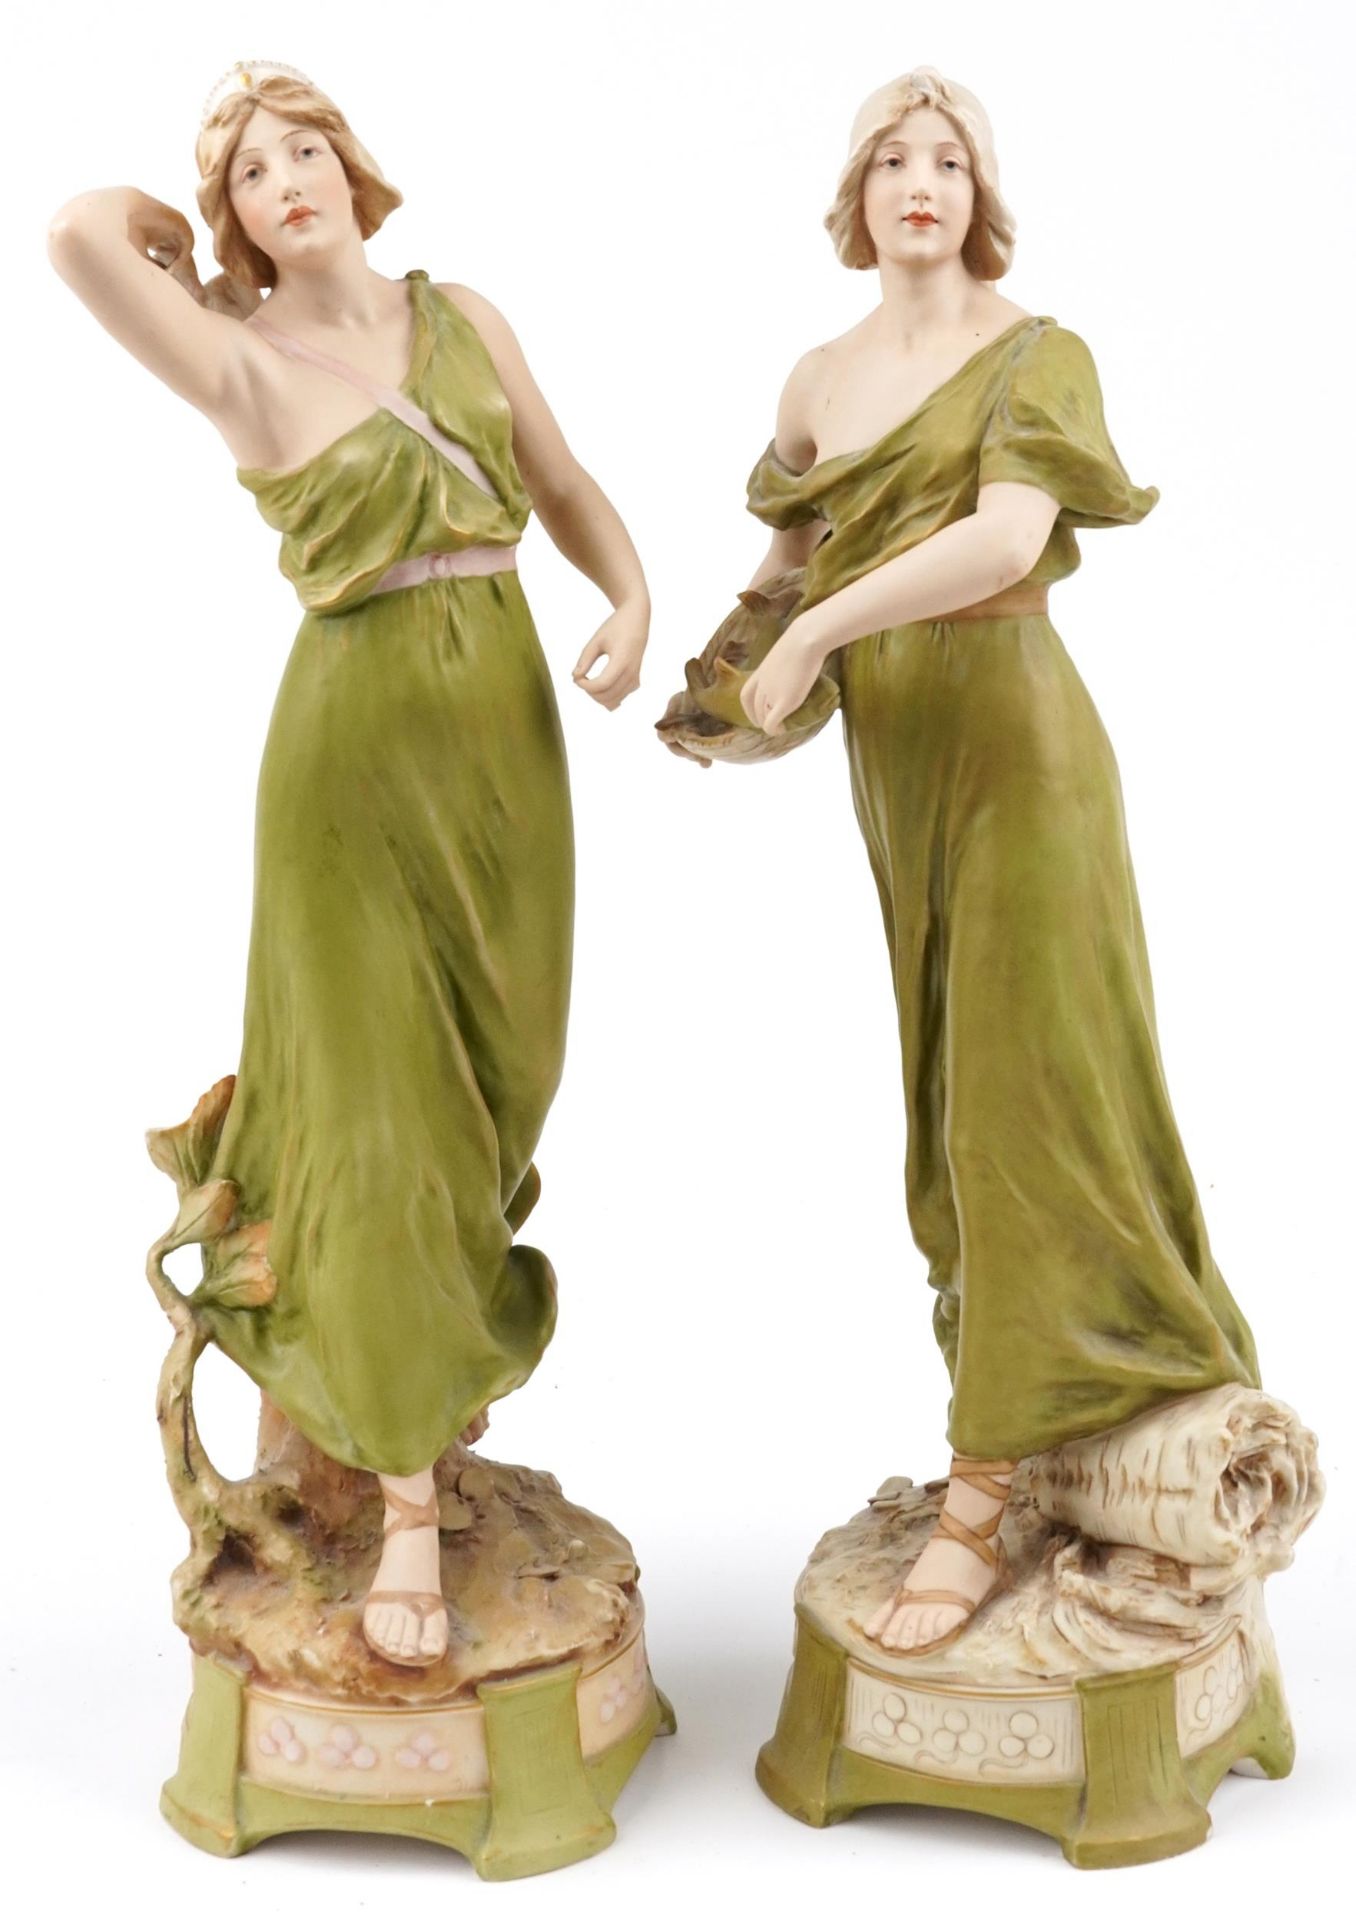 Royal Dux, large pair of Czechoslovakian Art Nouveau figurines of scantily dressed females including